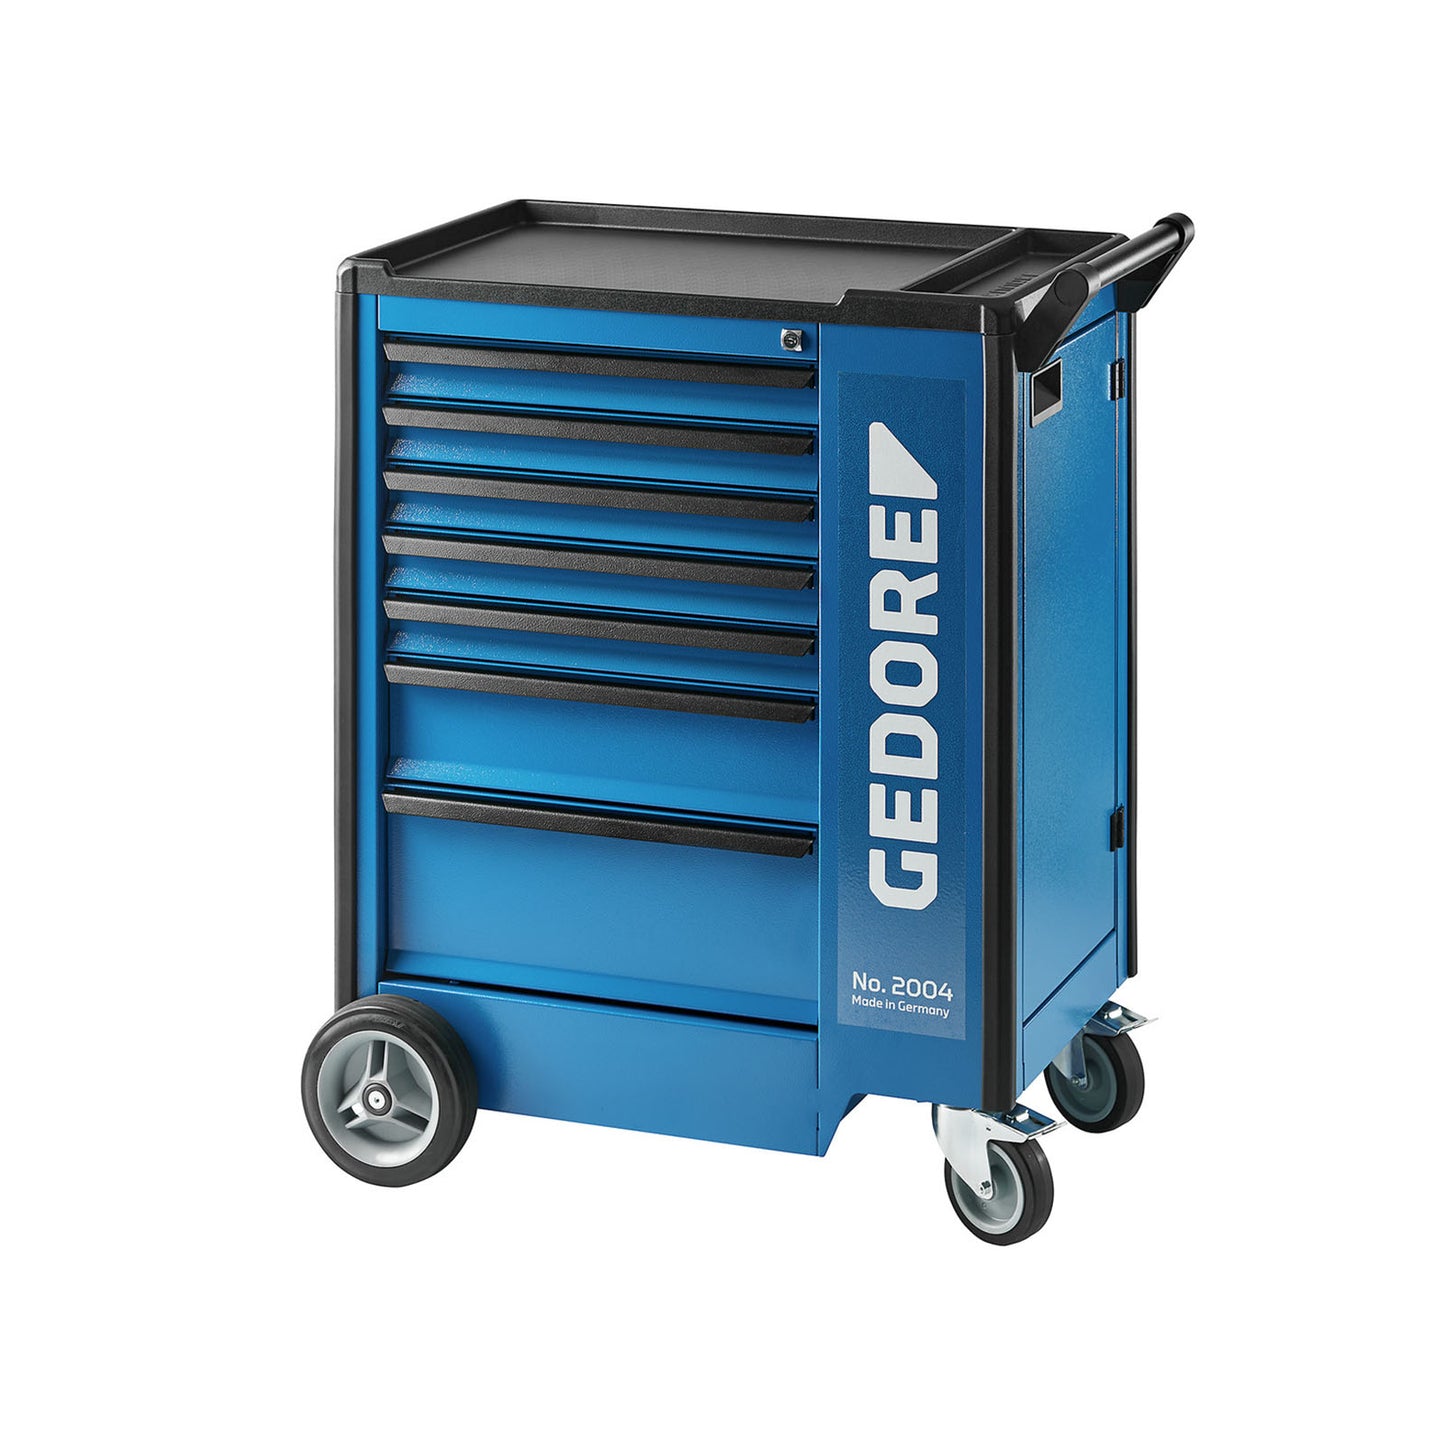 GEDORE 2004 0511 - Workshop trolley with 7 drawers (1640739)